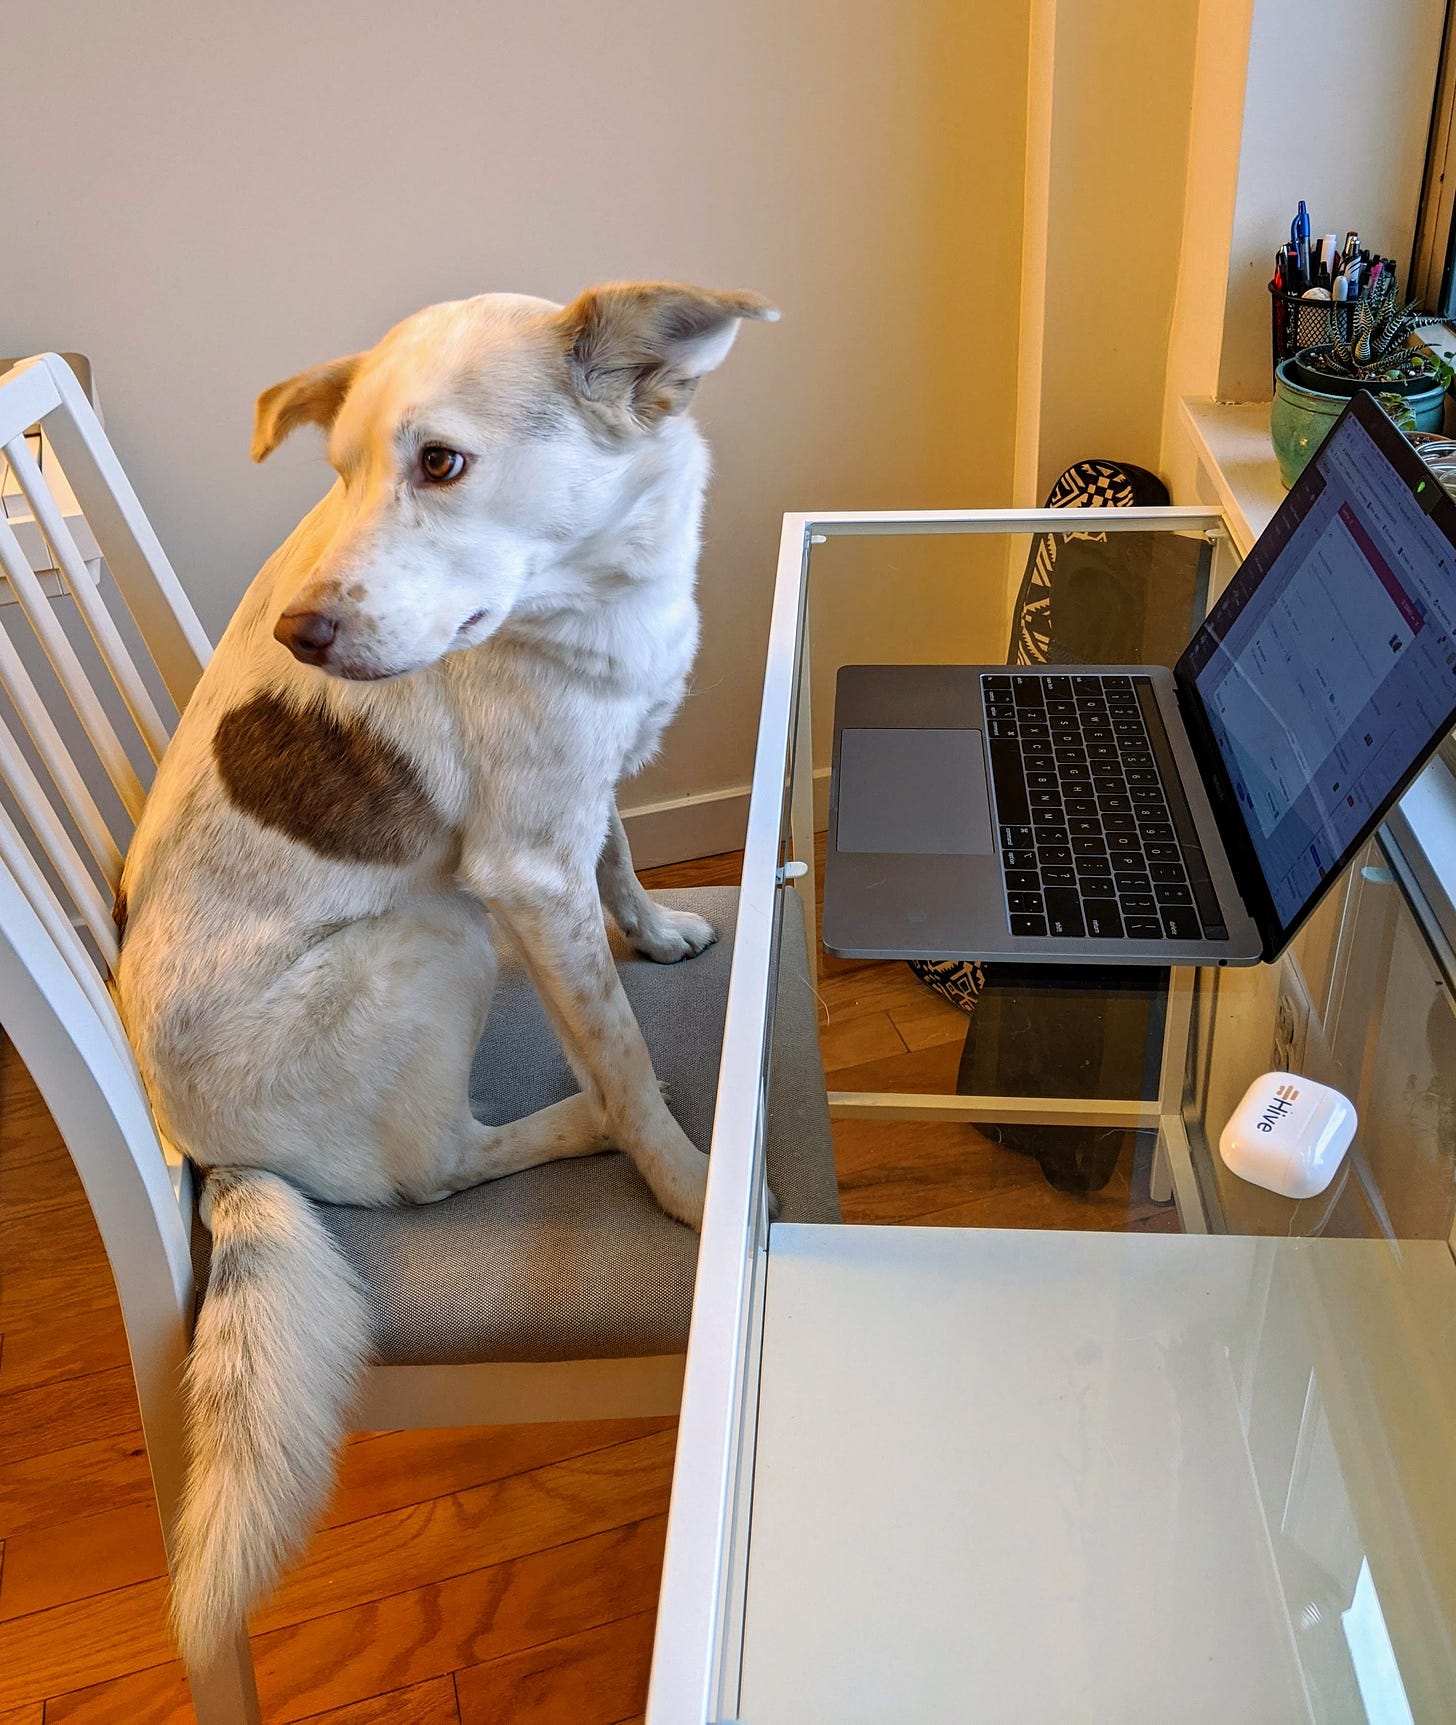 Dog sitting in front of laptop